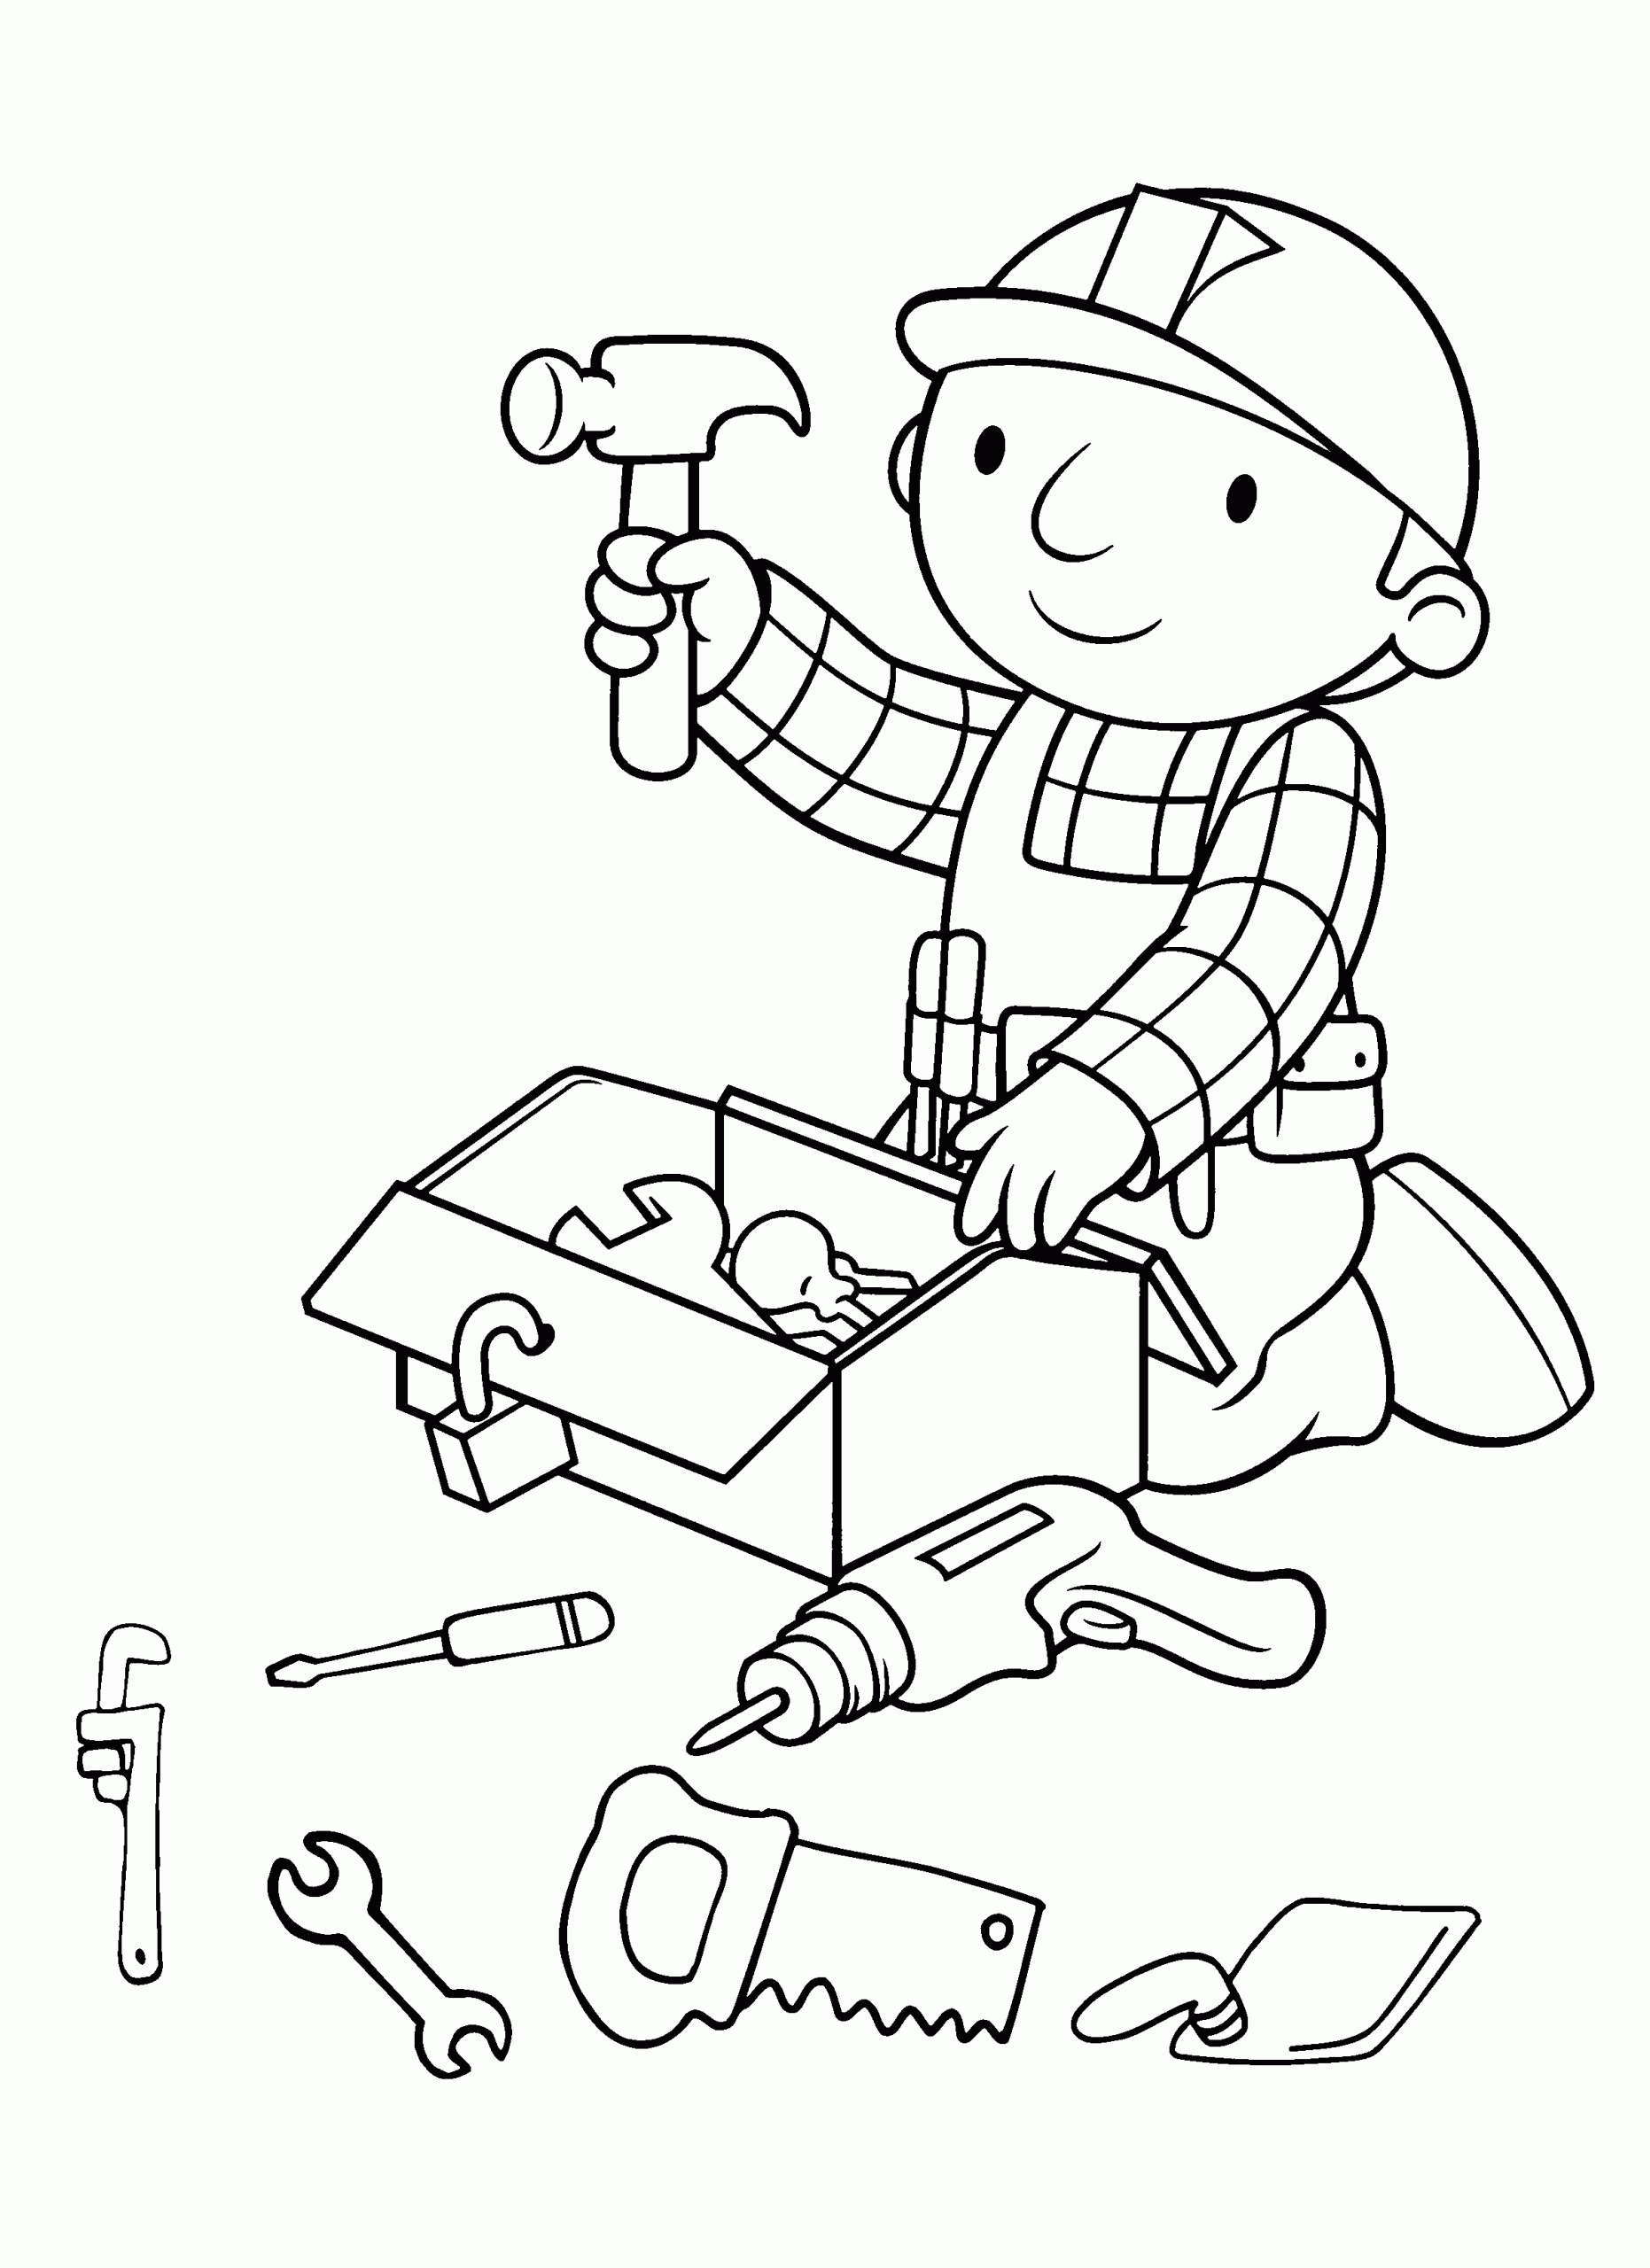 Coloring Sheets For Kids Com
 Free Printable Bob The Builder Coloring Pages For Kids